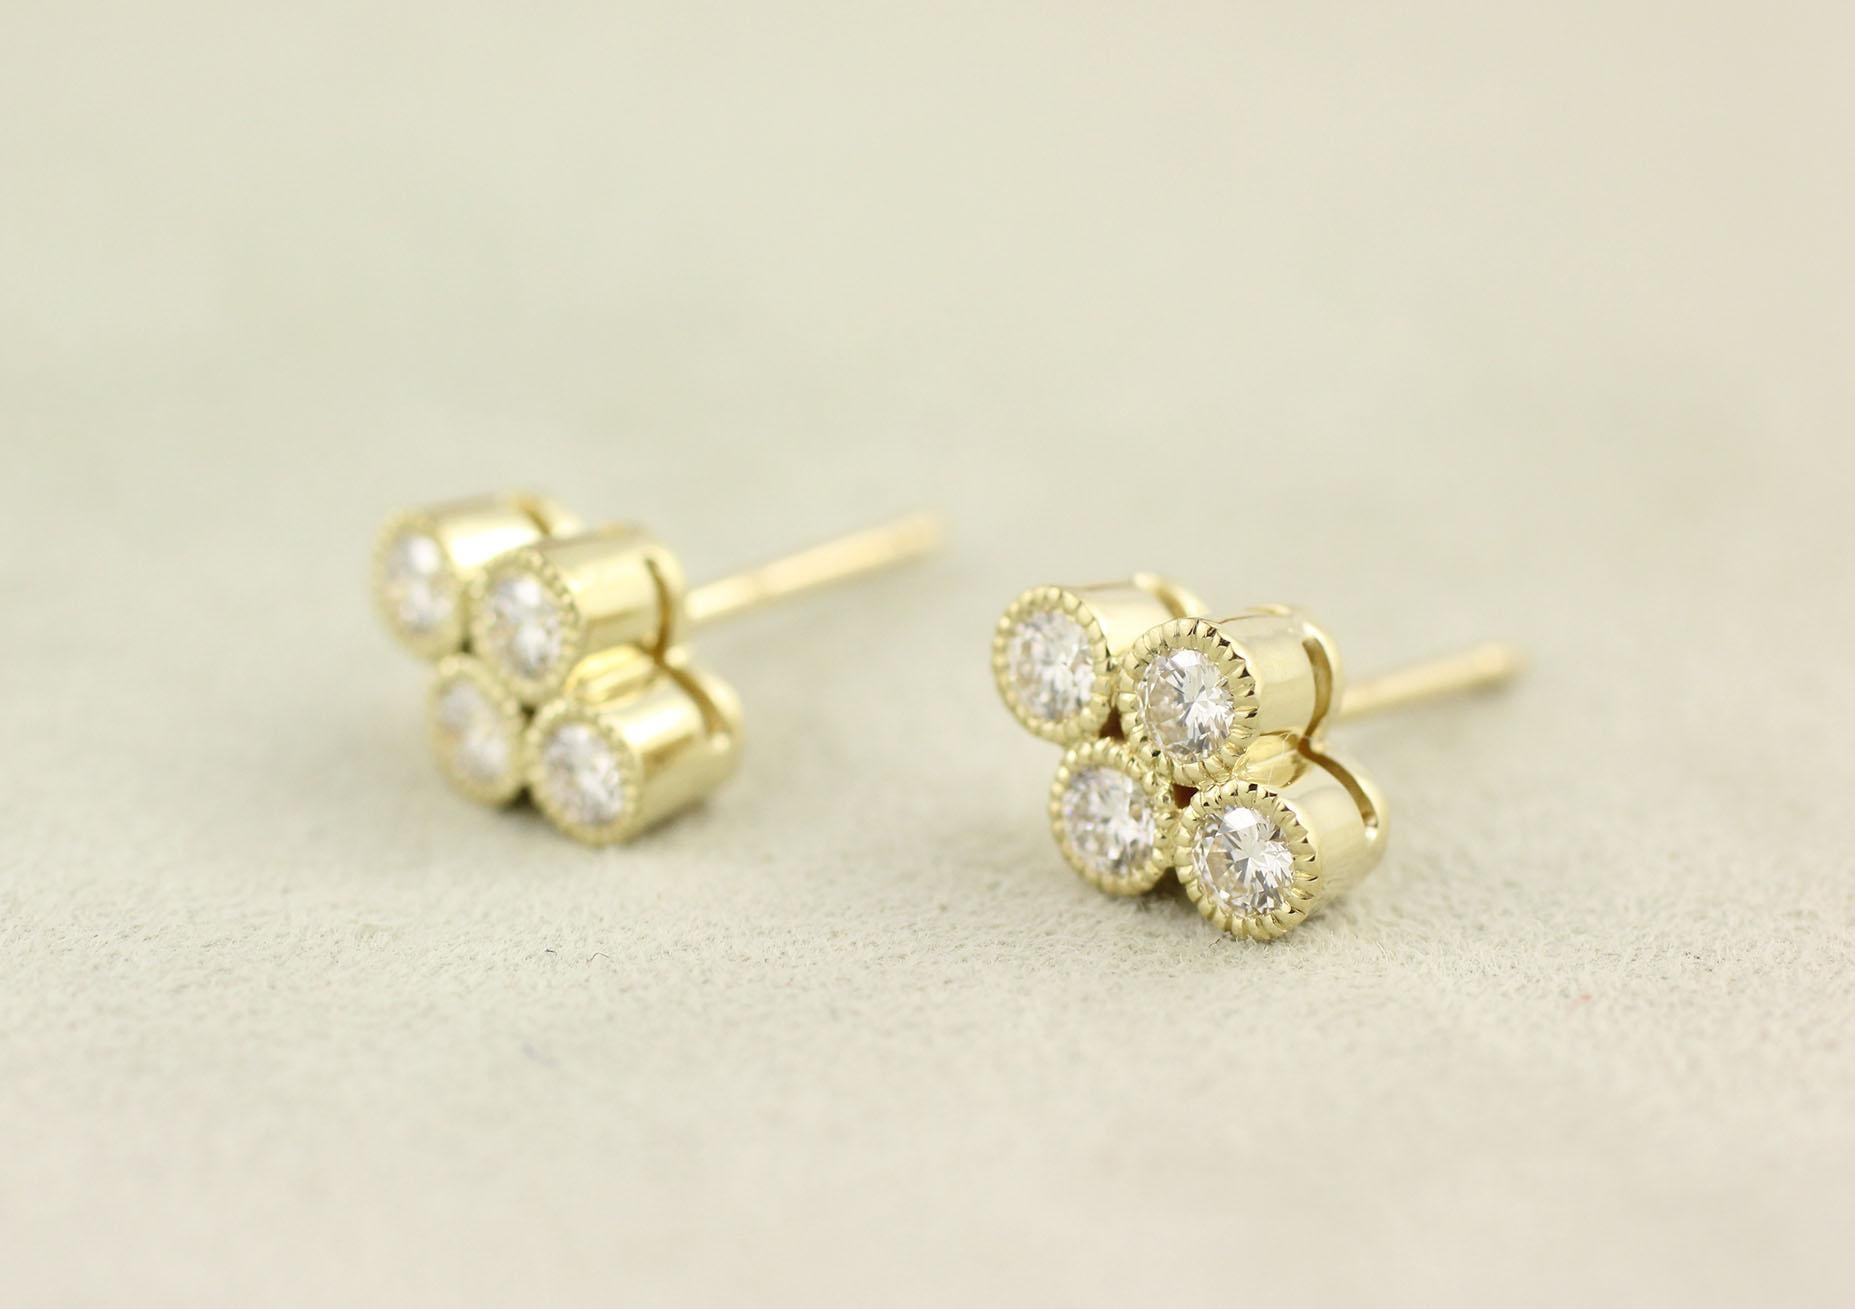 These 18 Kt Yellow Gold and Diamond Stud Earrings contain 8 Brilliant Cut Diamonds (.44 Cts.), bezel set with a milgrain edge detail.  A perennial Julius Cohen favorite, these earrings can also accommodate drops.  Please contact us to inquire about